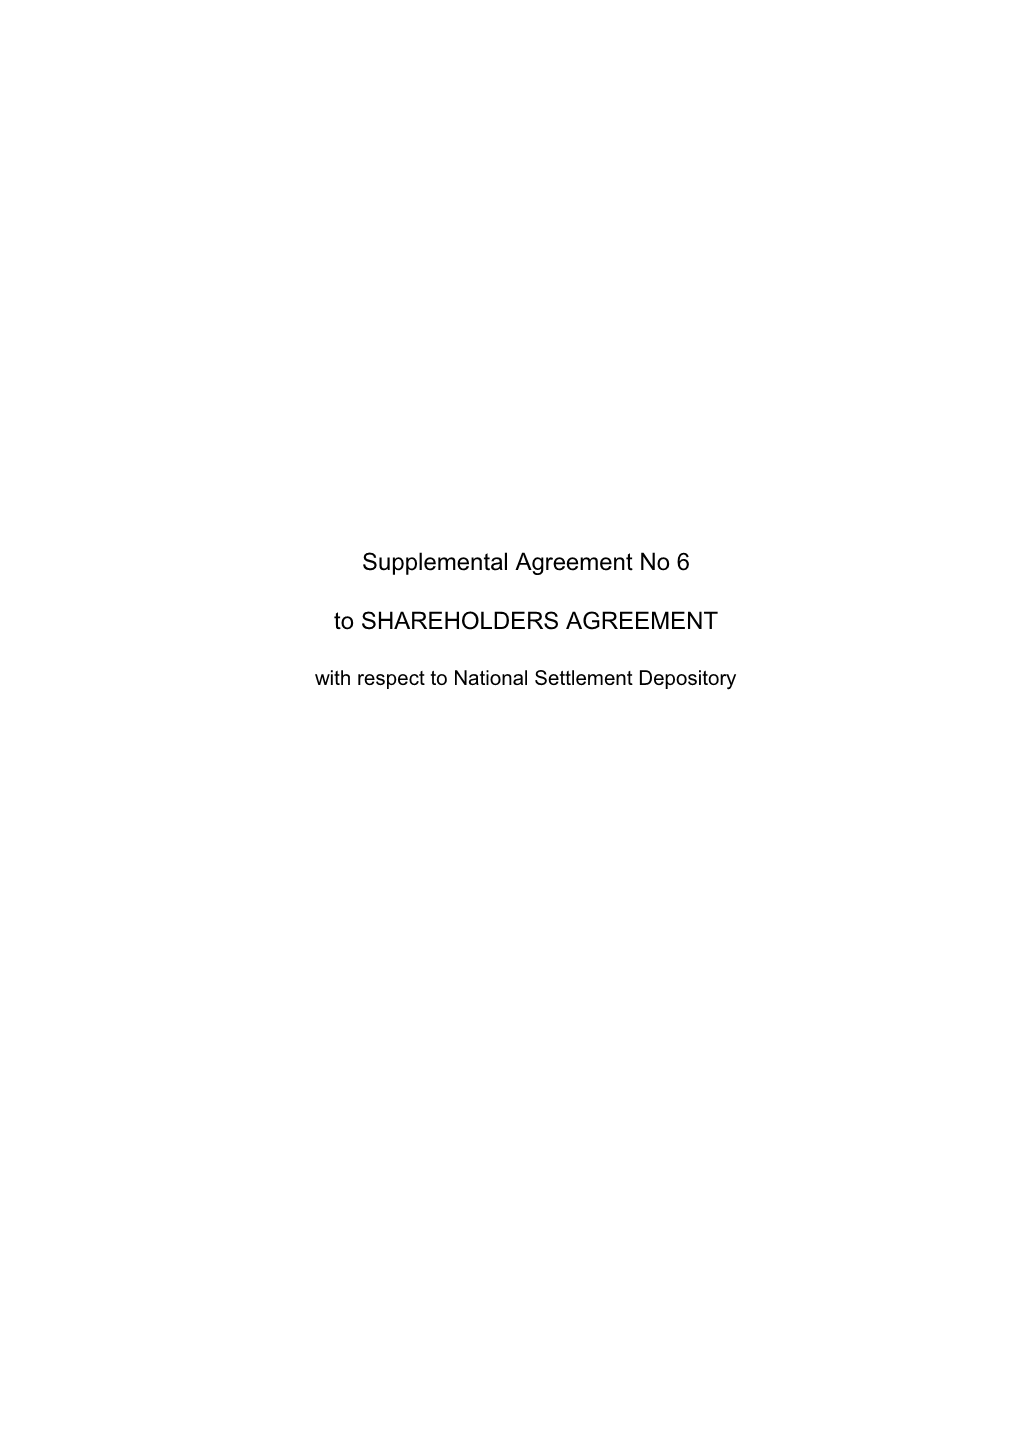 Supplemental Agreement No 6 to SHAREHOLDERS AGREEMENT